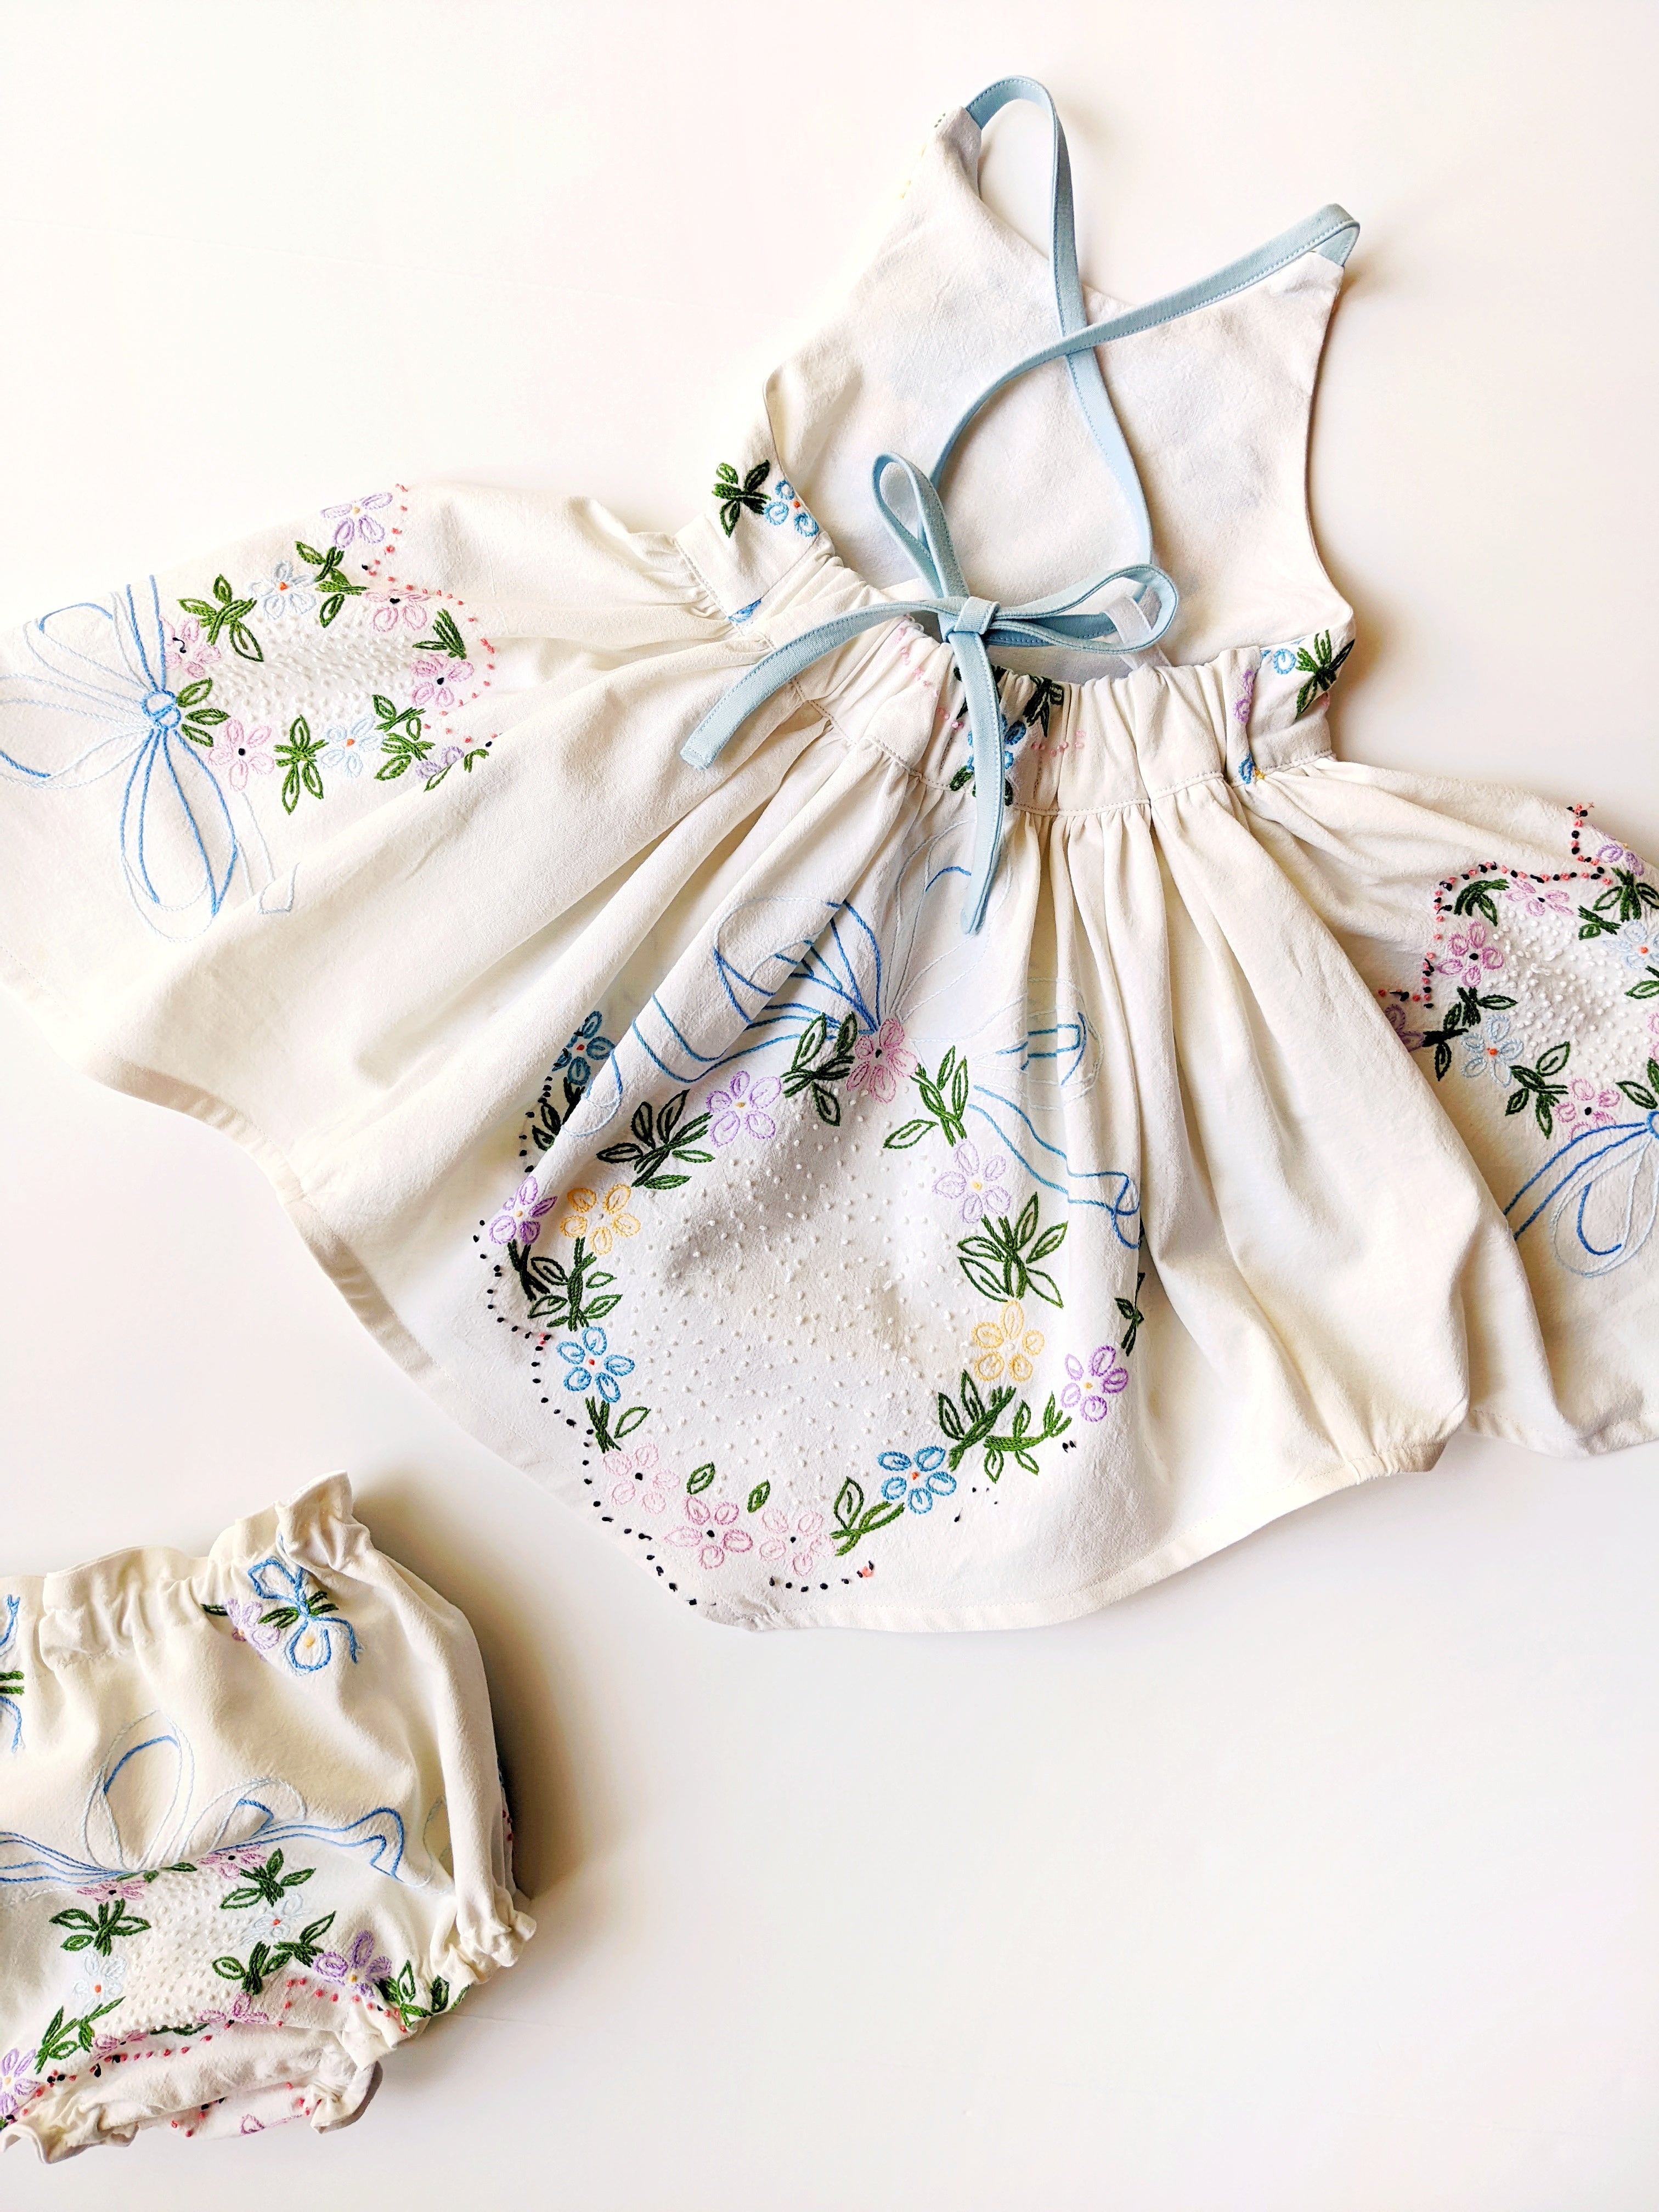 "Lily" style Halter Dress + Bloomers - Size 2T